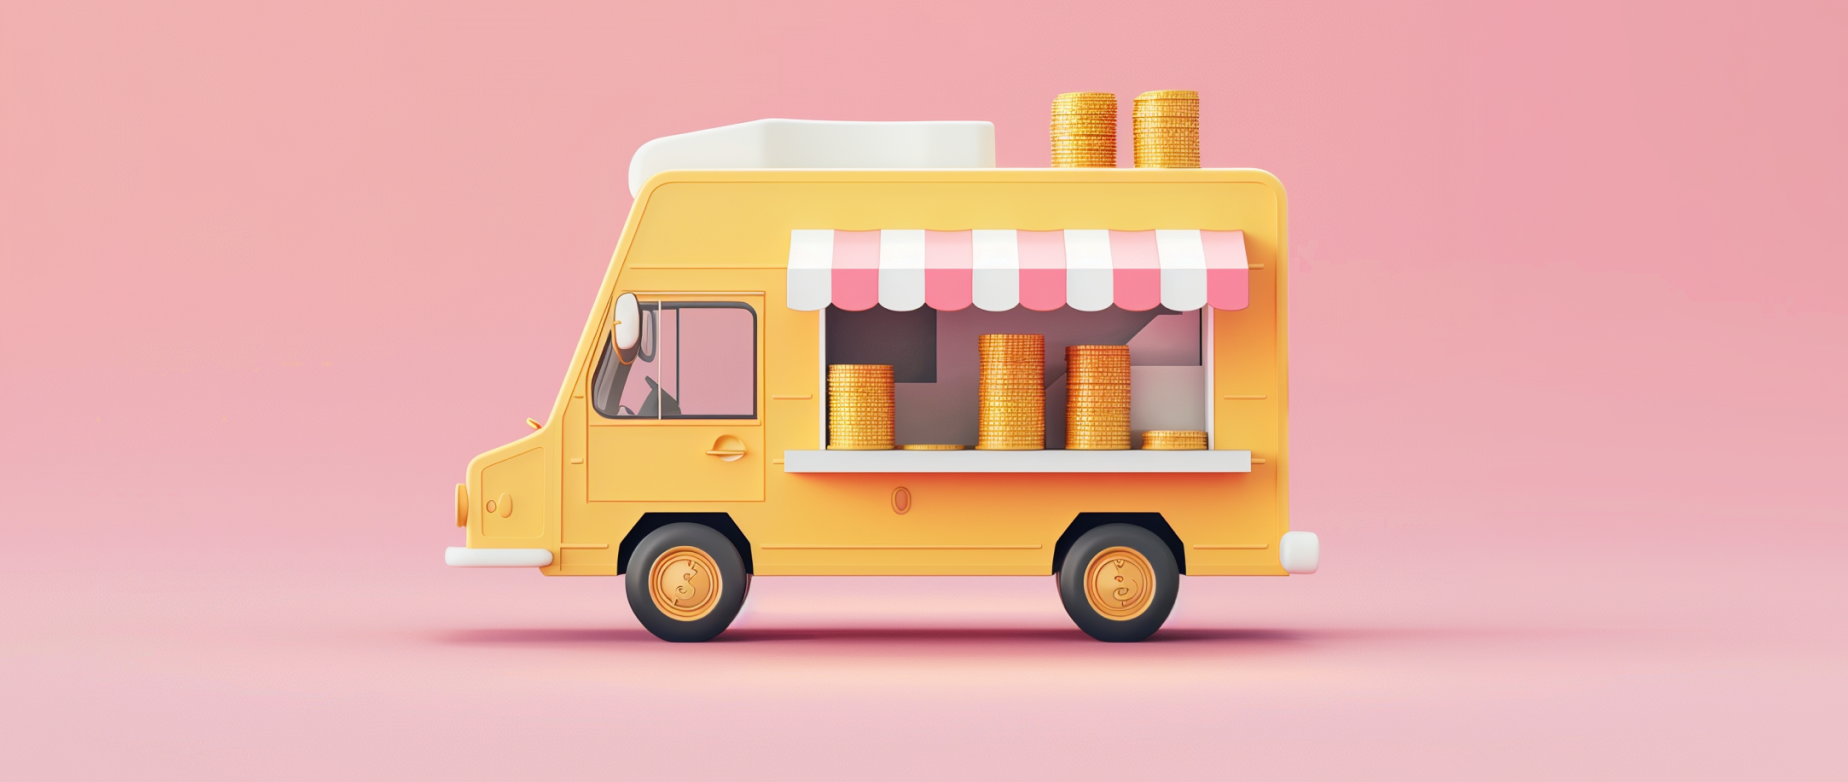 A yellow food truck with gold coins in the window on a pink background.